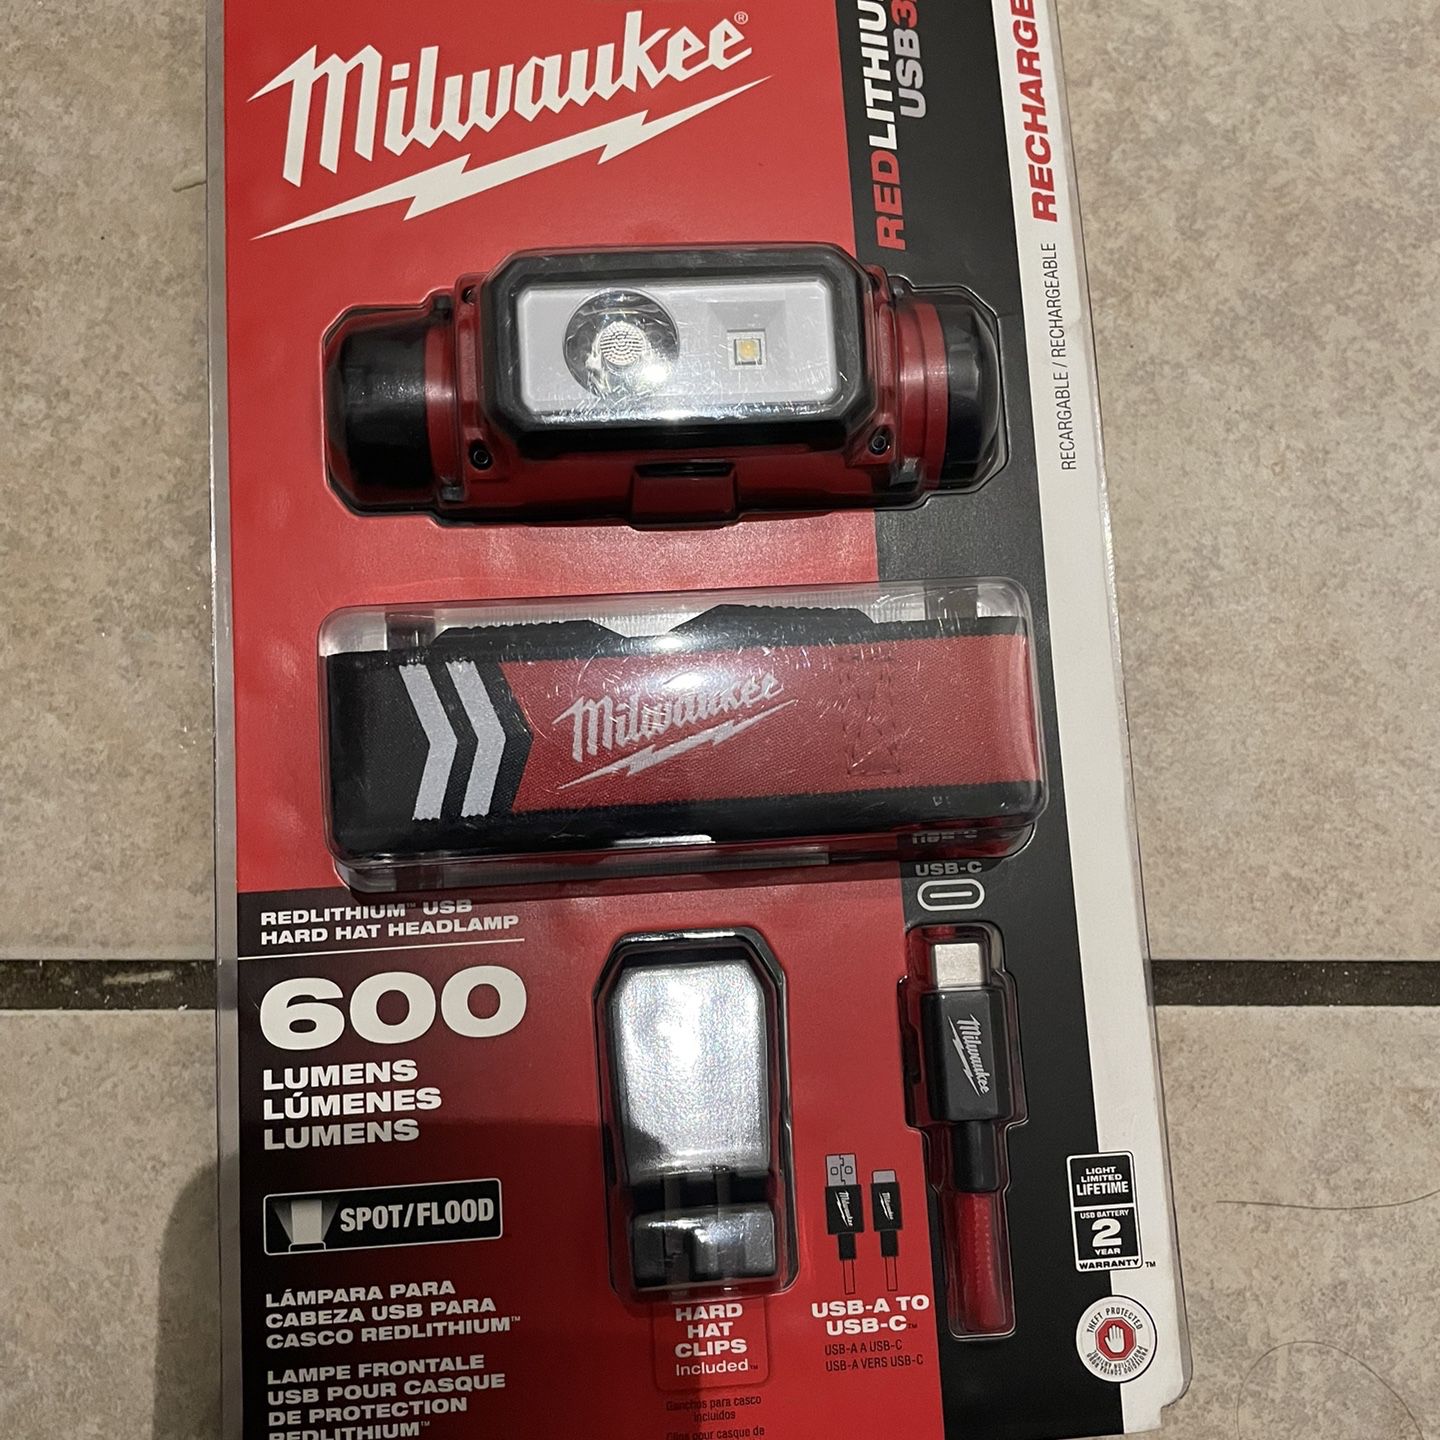 Milwaukee 600 Lumens LED REDLITHIUM USB Low-Profile Hard Hat Headlamp for  Sale in Crowley, TX OfferUp